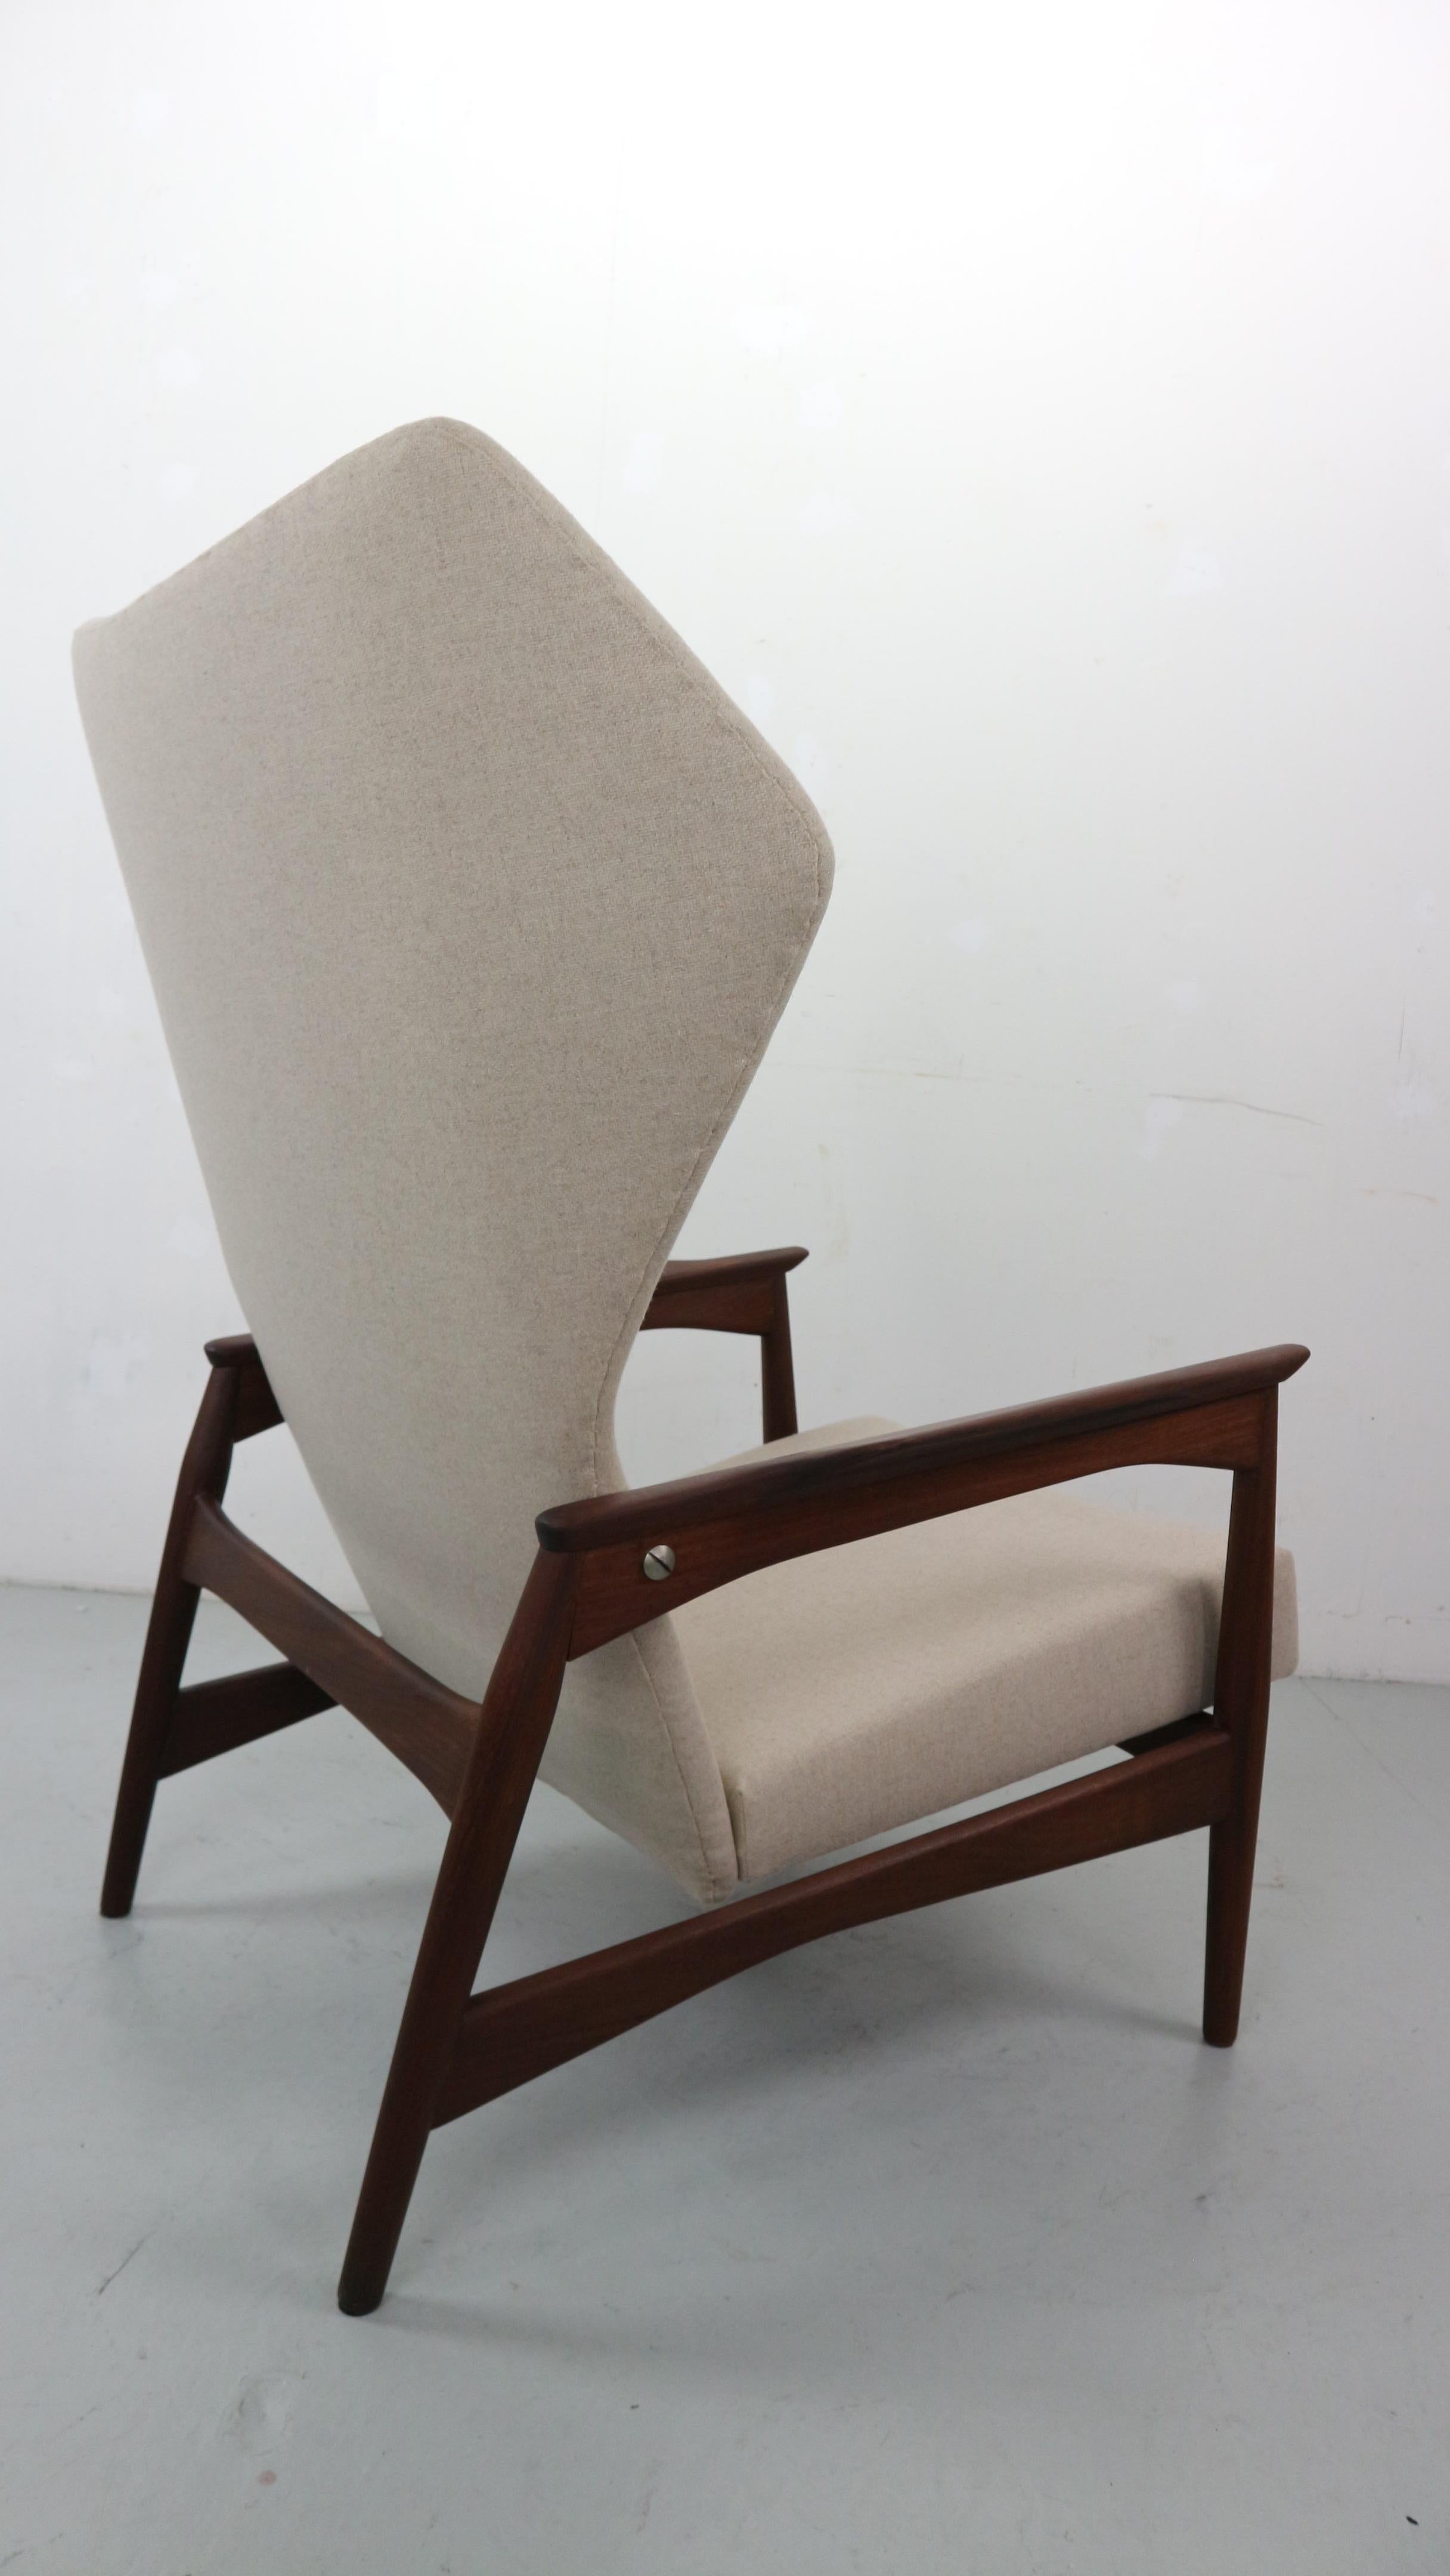 Wingback lounge chair designed by Ib Kofod-Larsen in 1954. The chair is reclinable and it can be adjusted in three positions, as seen in the pictures. The chairs have been reupholstered in a natural wool beige color, perfect combination with the